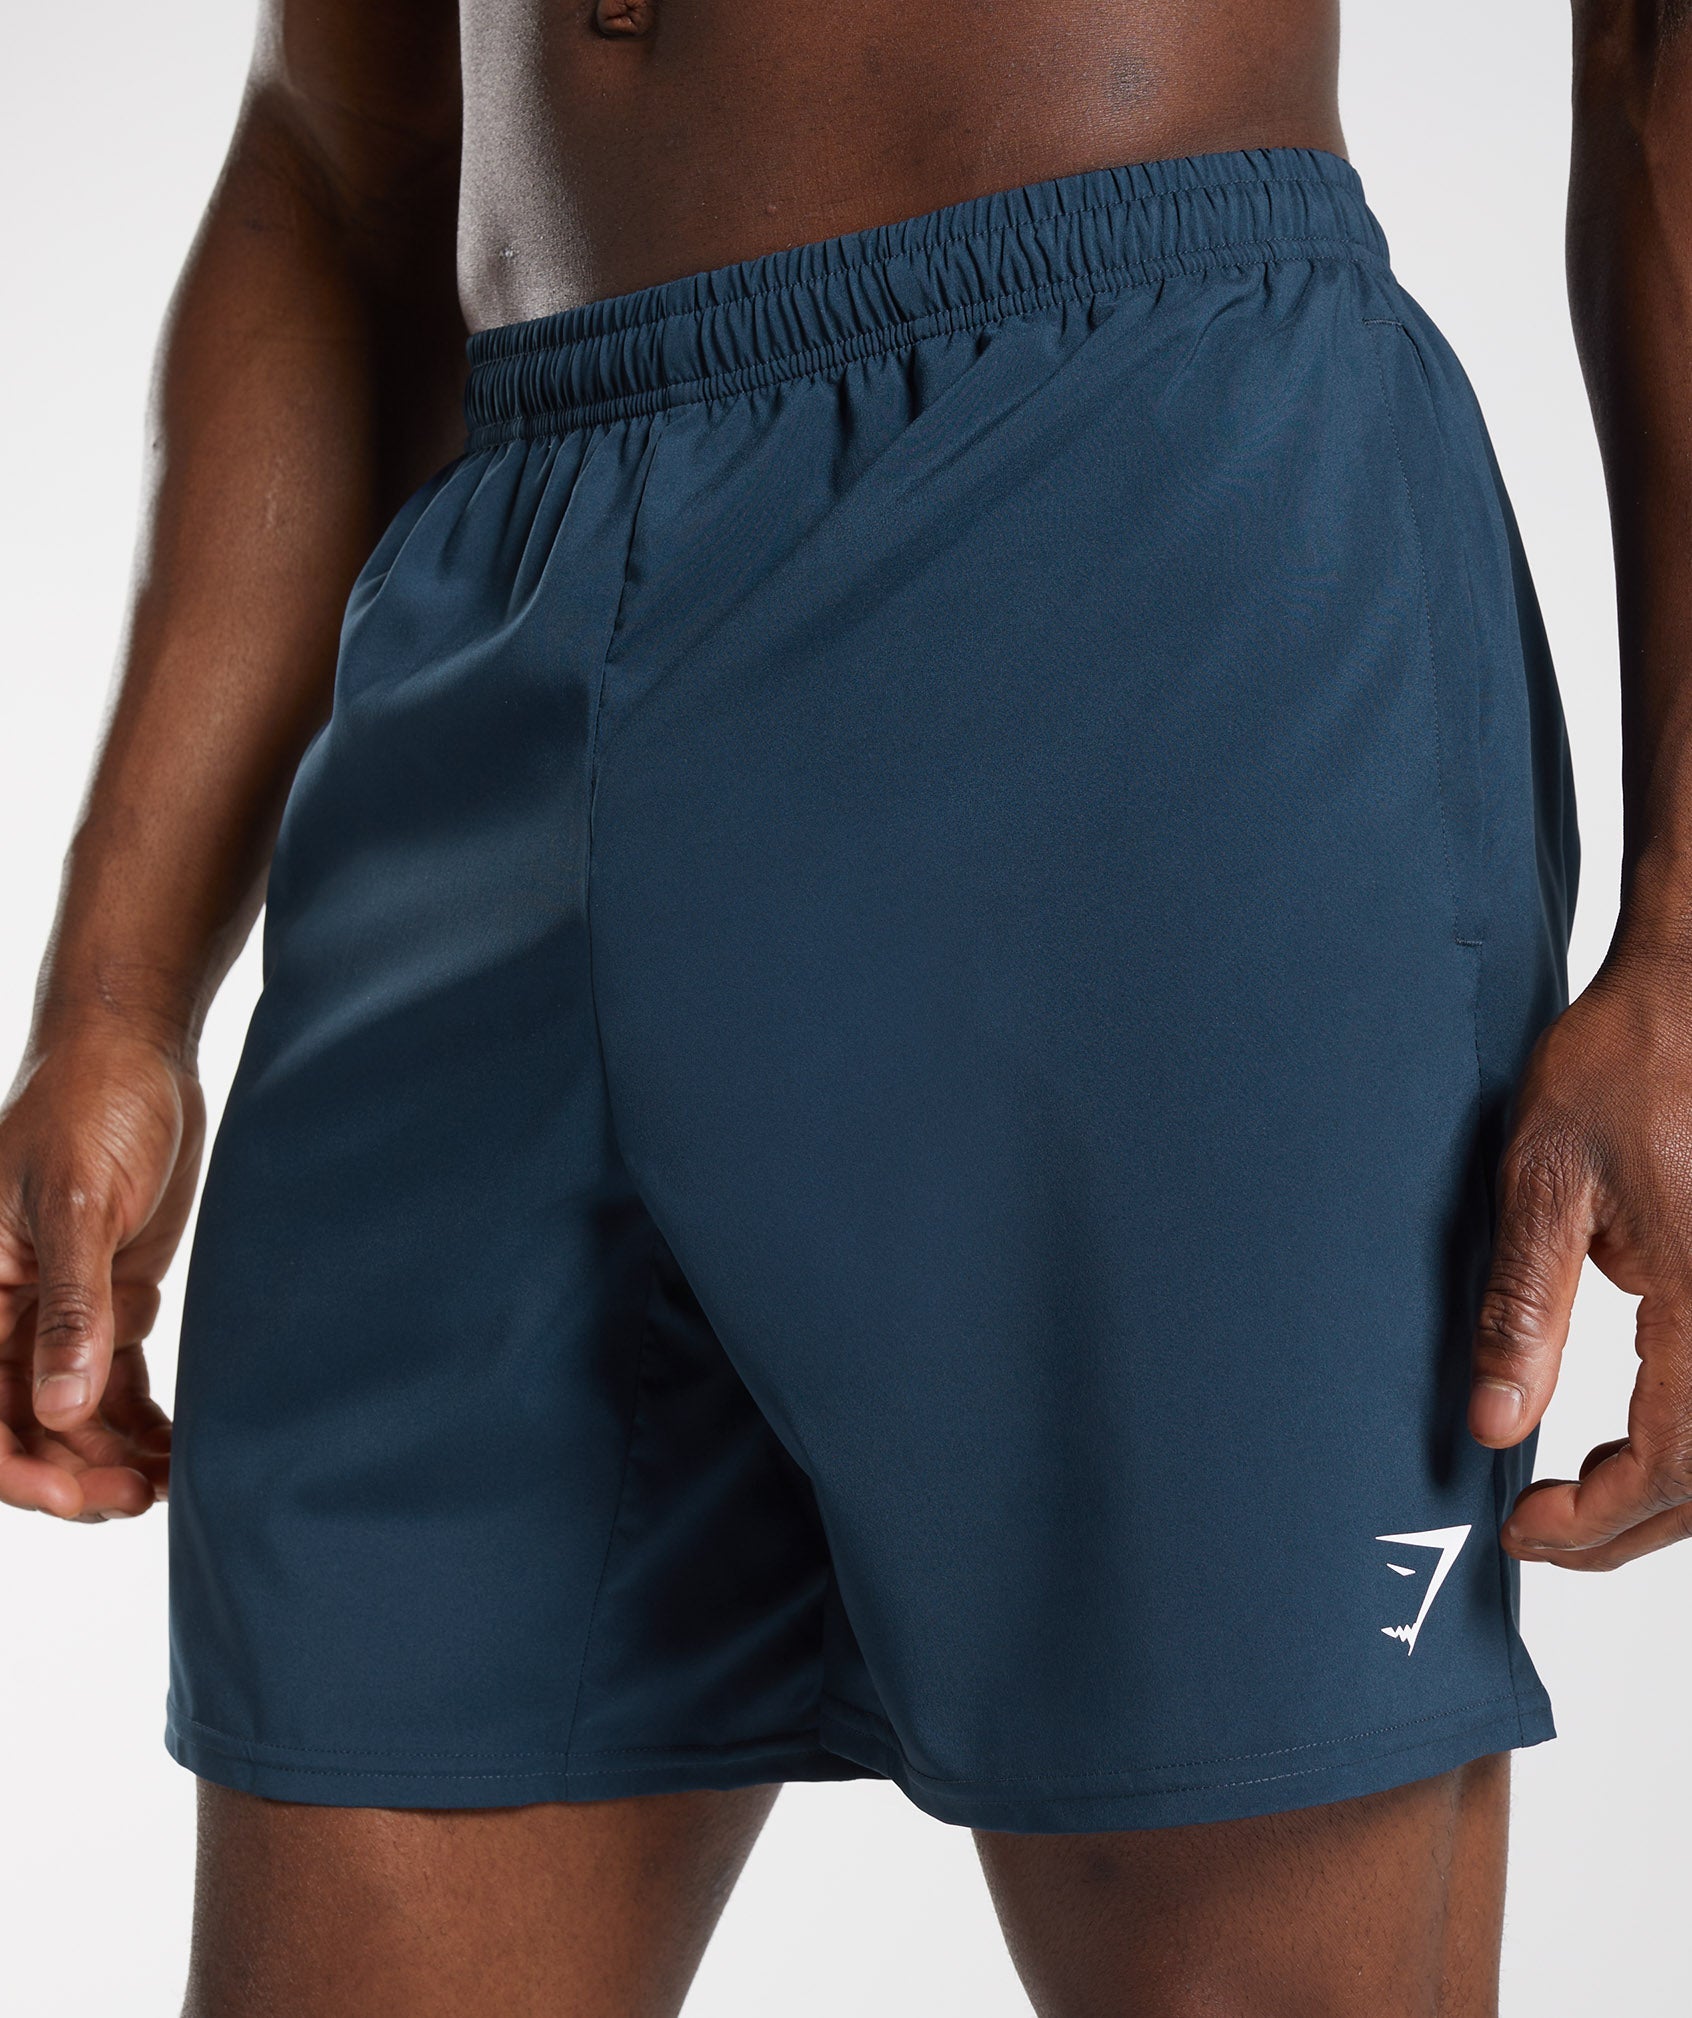 Arrival Shorts in Navy - view 3